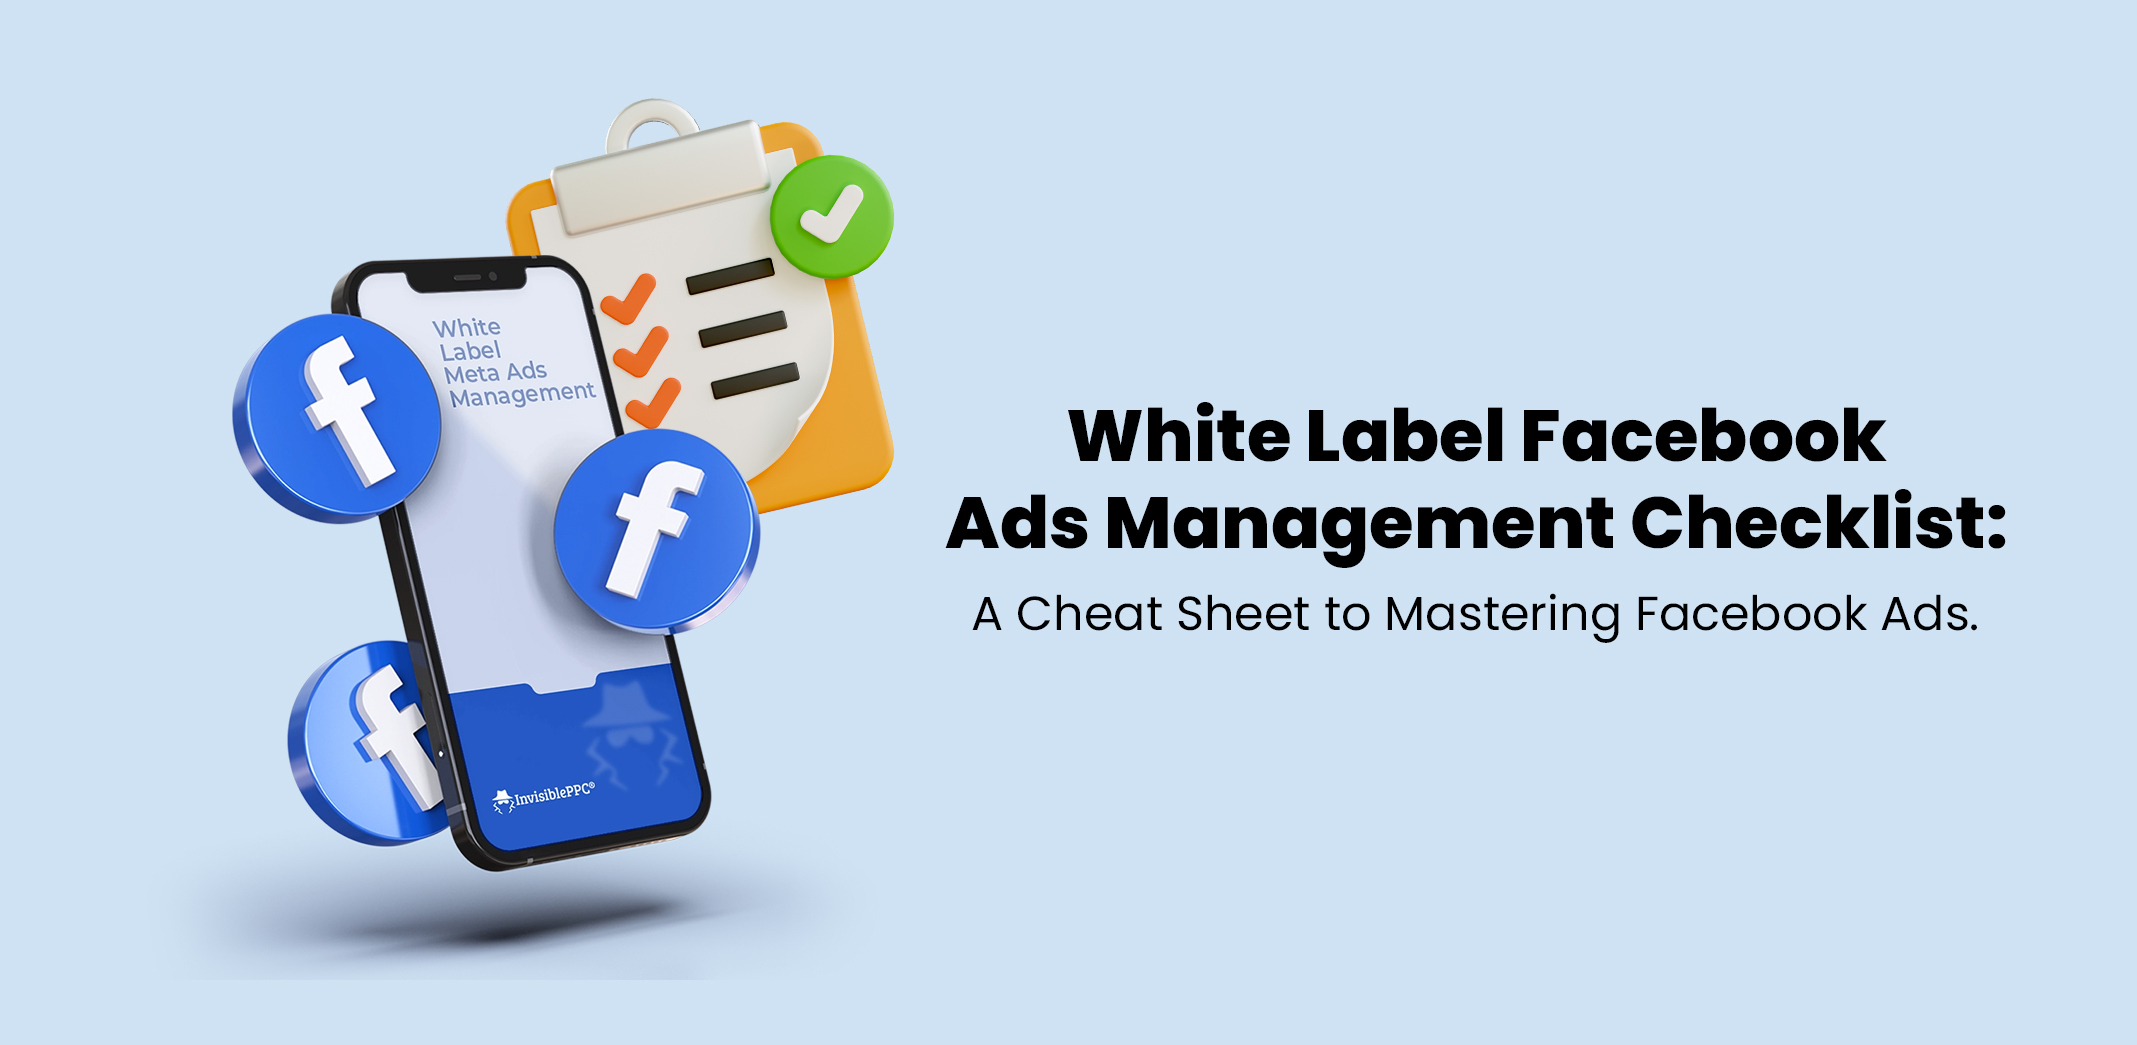 White Label Facebook Ads Management Checklist: A Cheat Sheet to Mastering Facebook Ads.